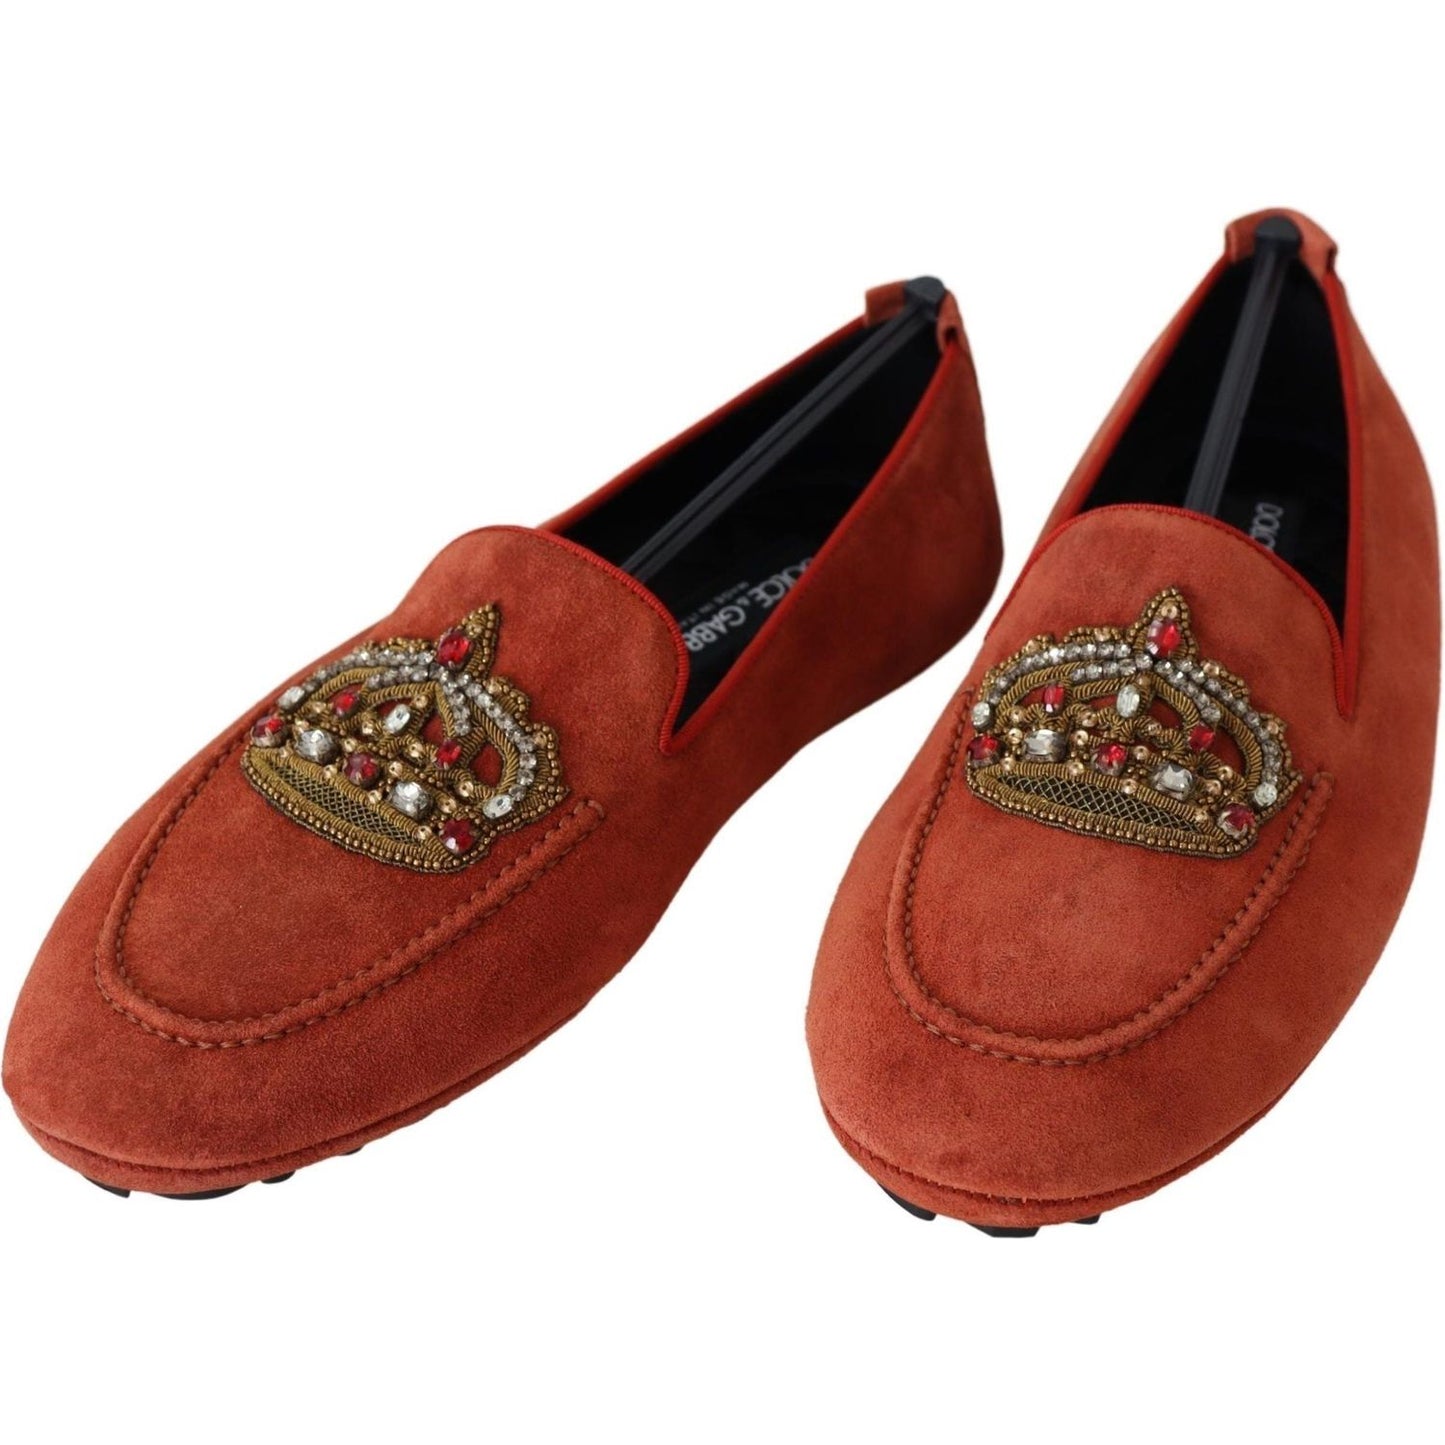 Dolce & Gabbana Opulent Orange Leather Loafers with Gold Embroidery orange-leather-crystal-crown-loafers-shoes IMG_5414-scaled-e7457db6-648.jpg